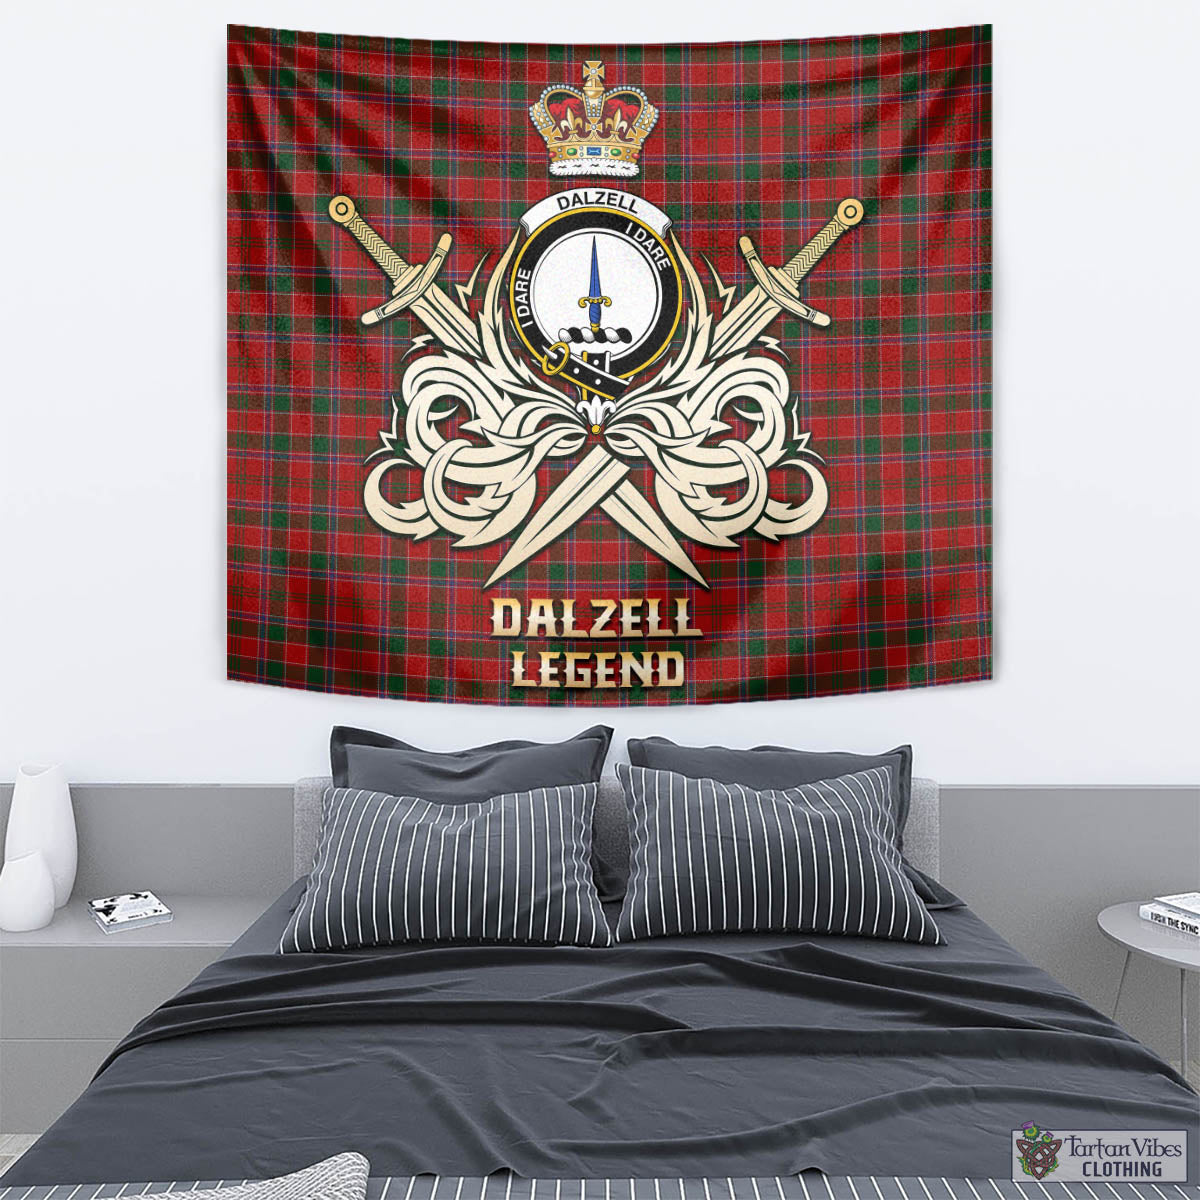 Tartan Vibes Clothing Dalzell (Dalziel) Tartan Tapestry with Clan Crest and the Golden Sword of Courageous Legacy